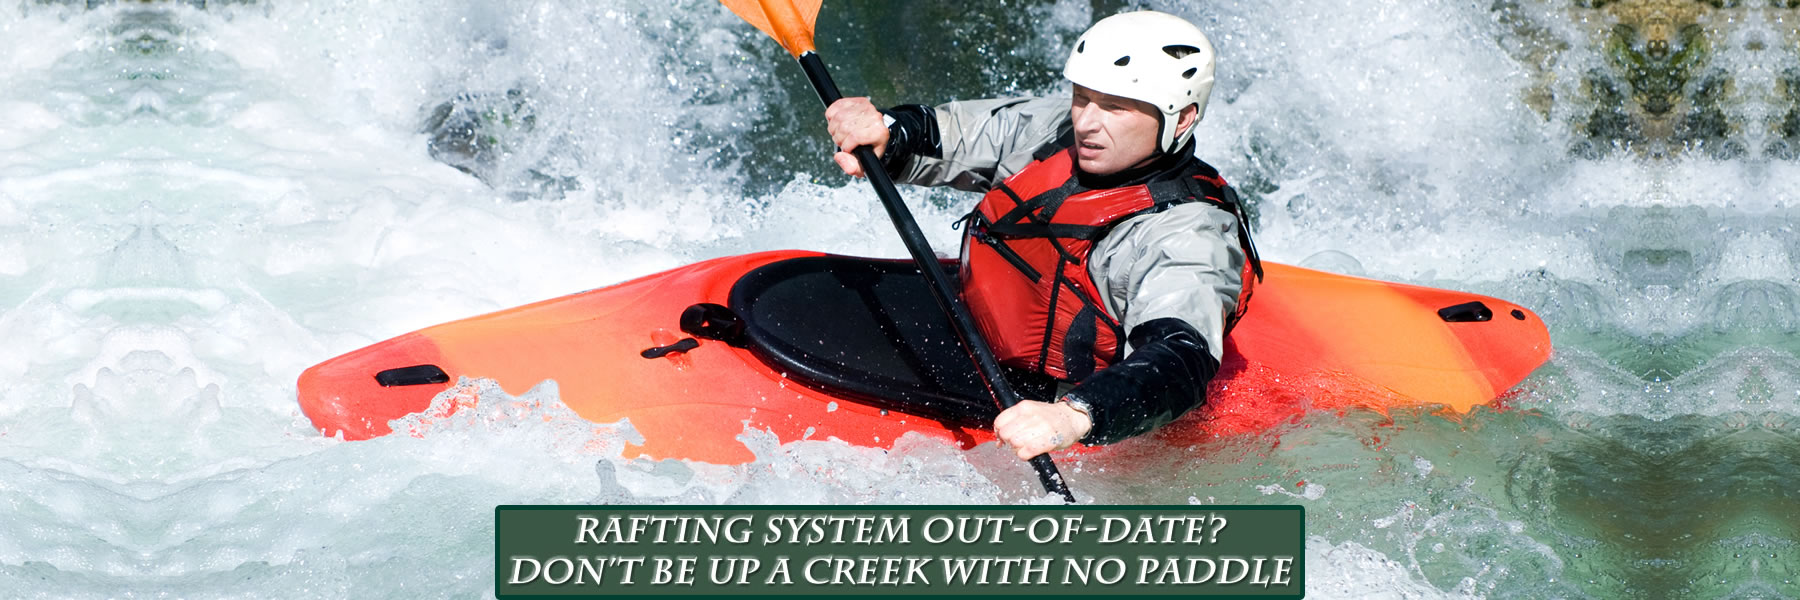 Rafting and tour activity reservation software with online reservations